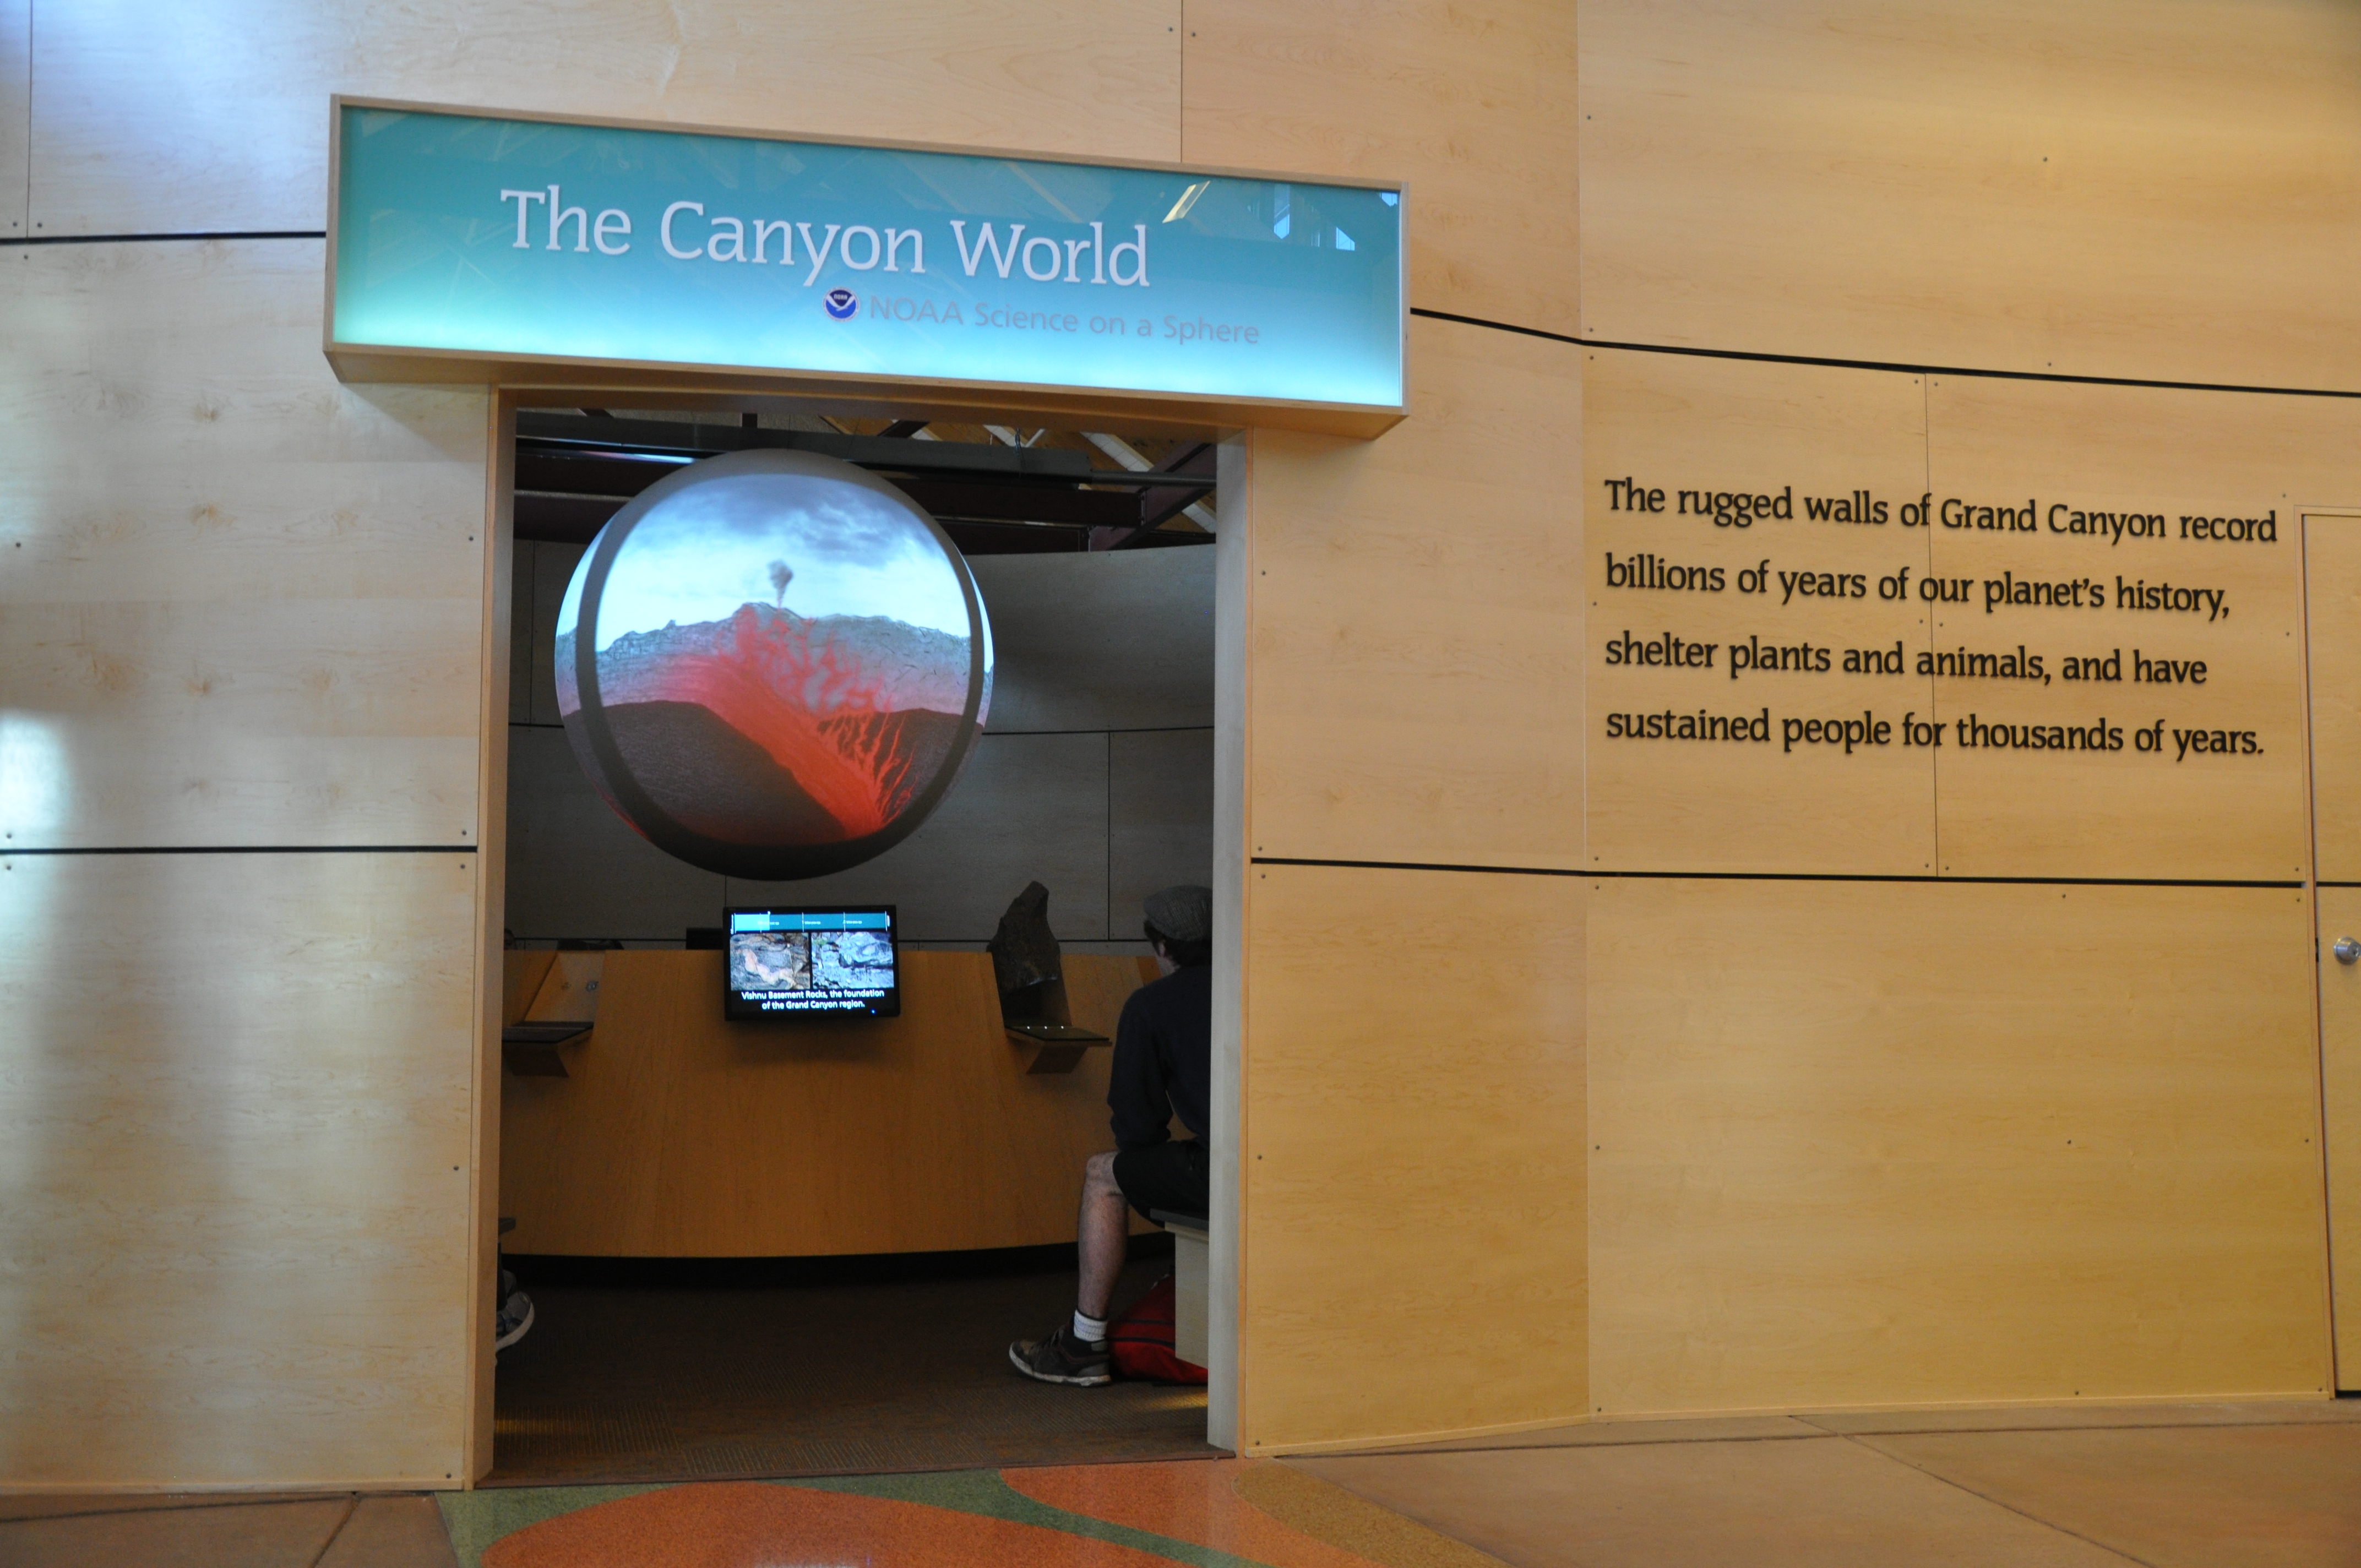 Science On a Sphere is visible through a doorway beneath a sign that read 'The Canyon World: NOAA Science On a Sphere'